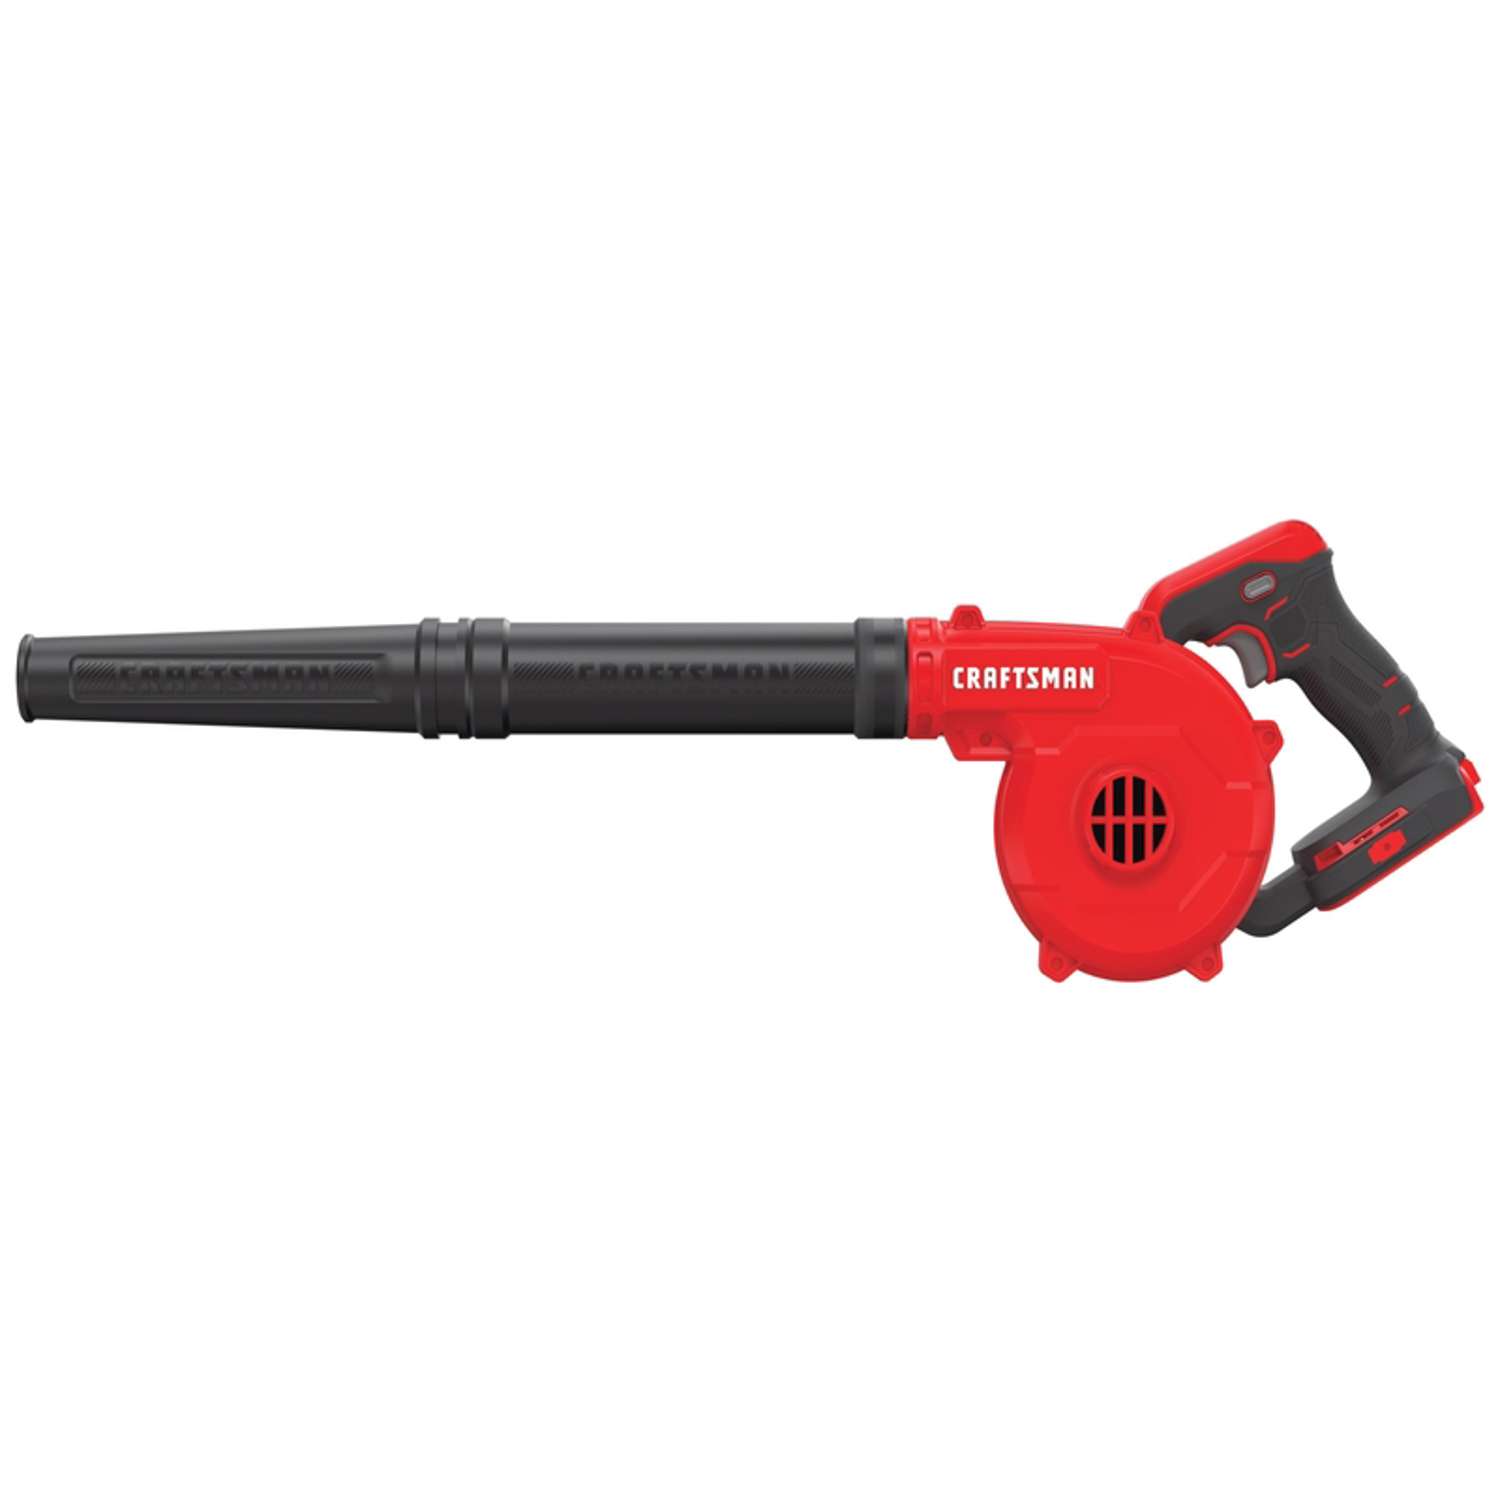 EZ Travel Hand Held Electric Blower and Air Vacuum Tool (Assorted Colors)  Mini Blower Leaf Blower and Vacuum Combo